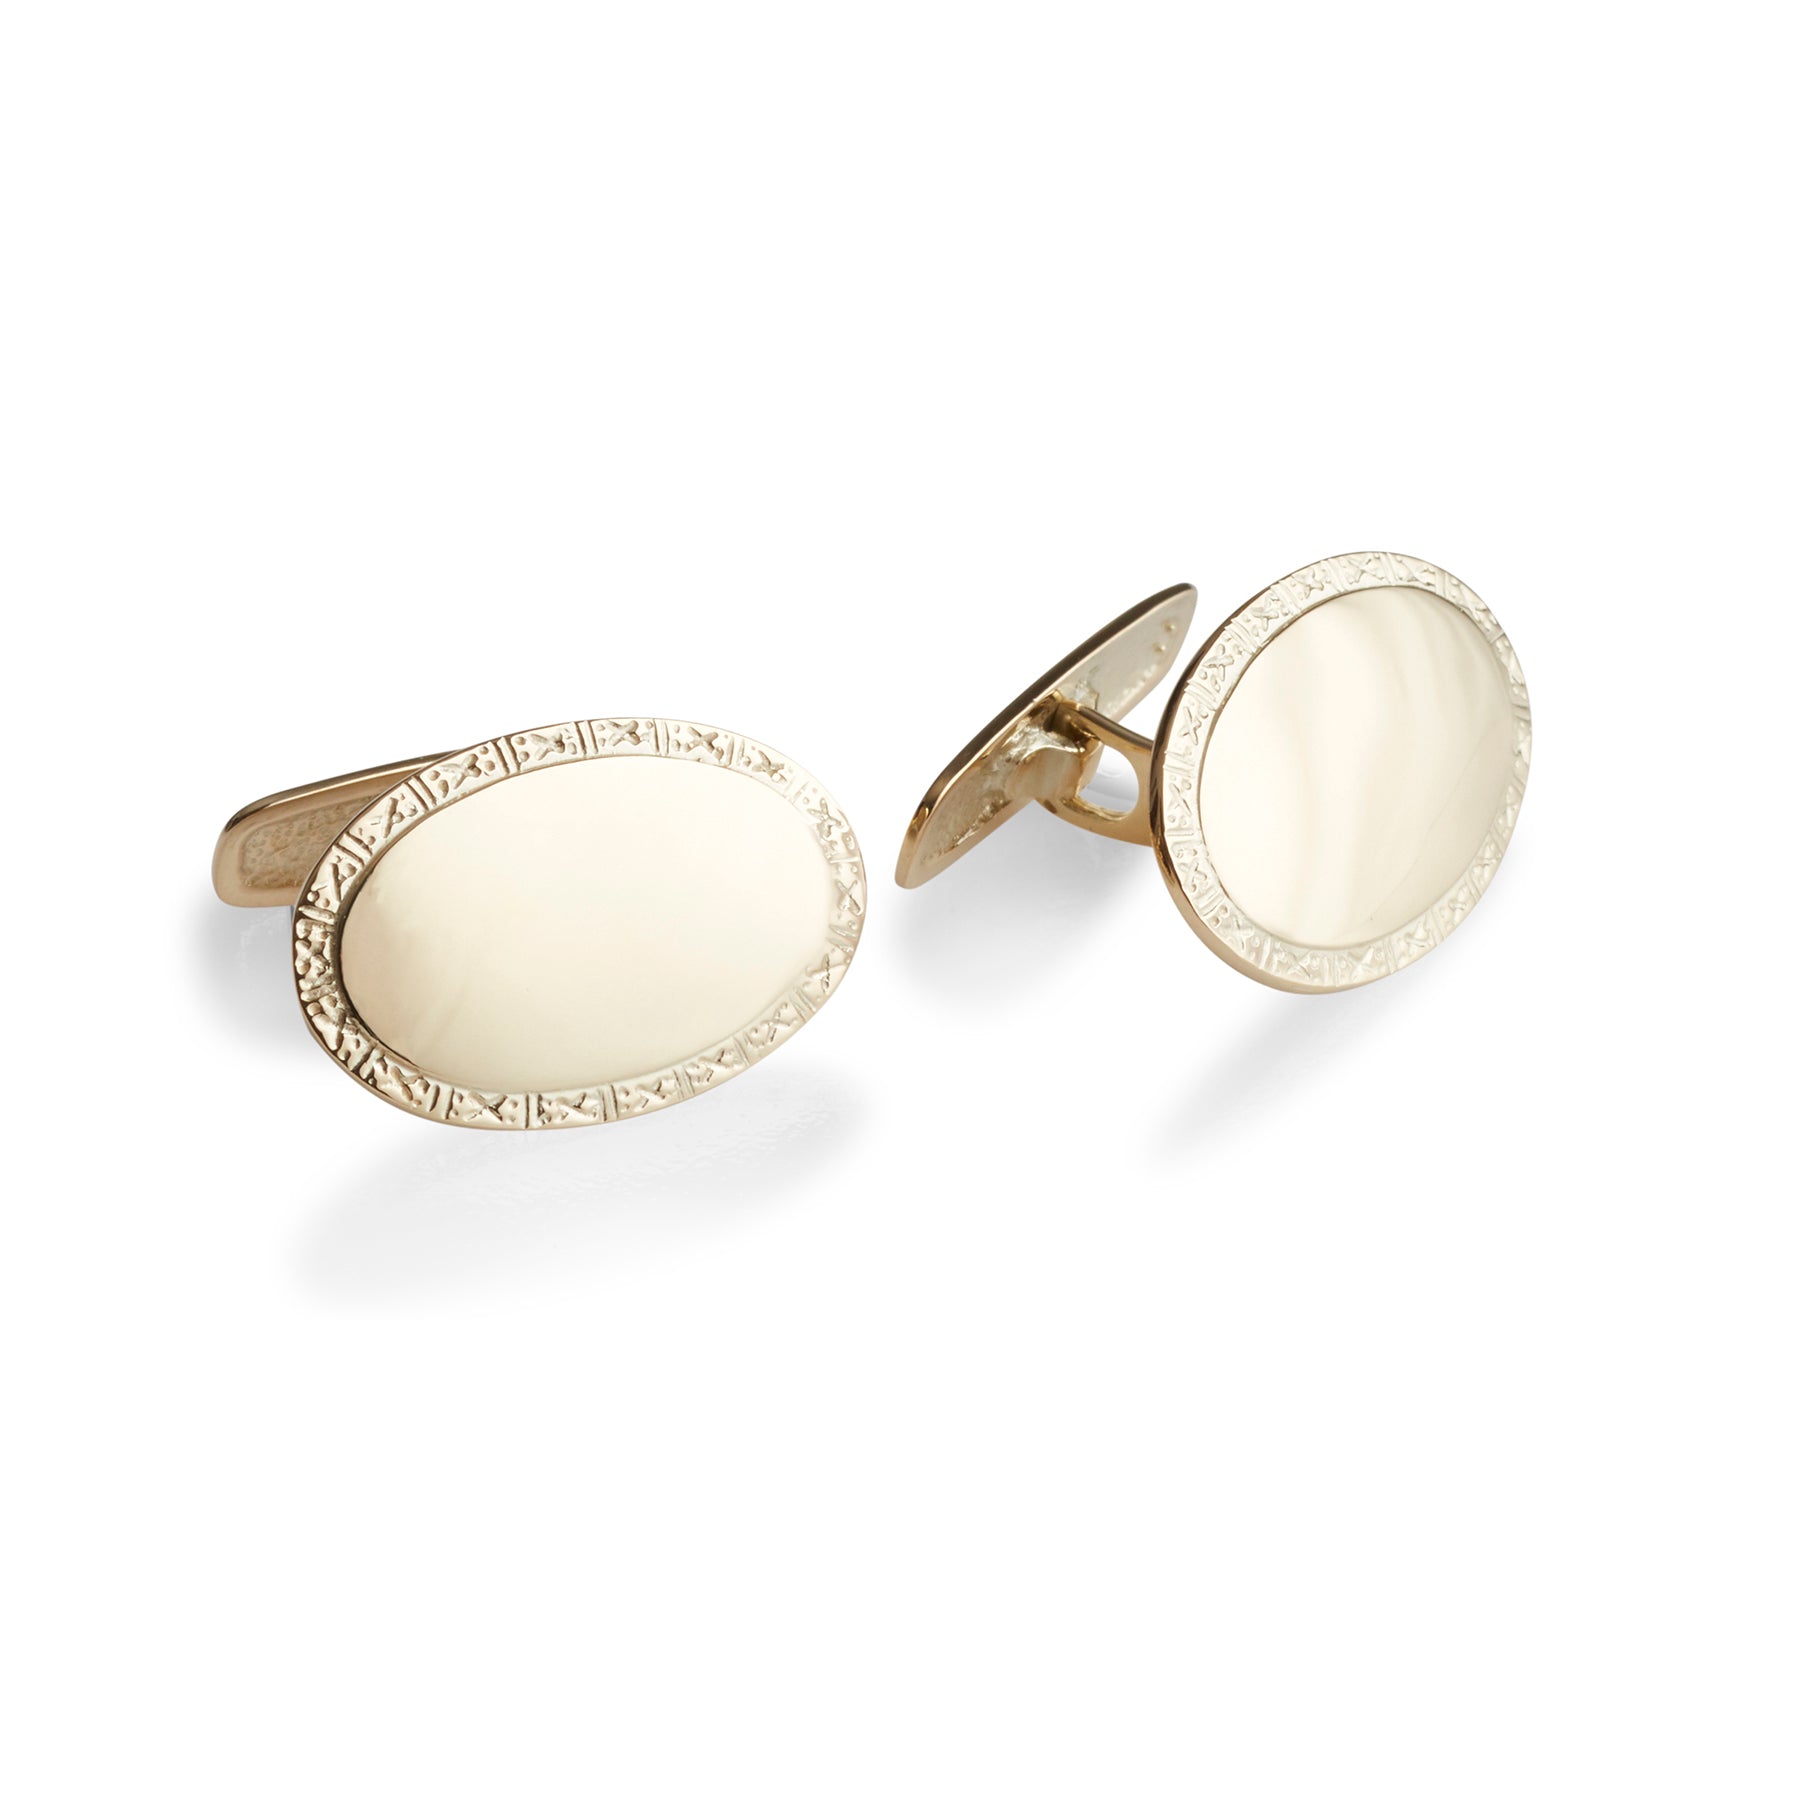 Oval cufflinks with yellow gold edge